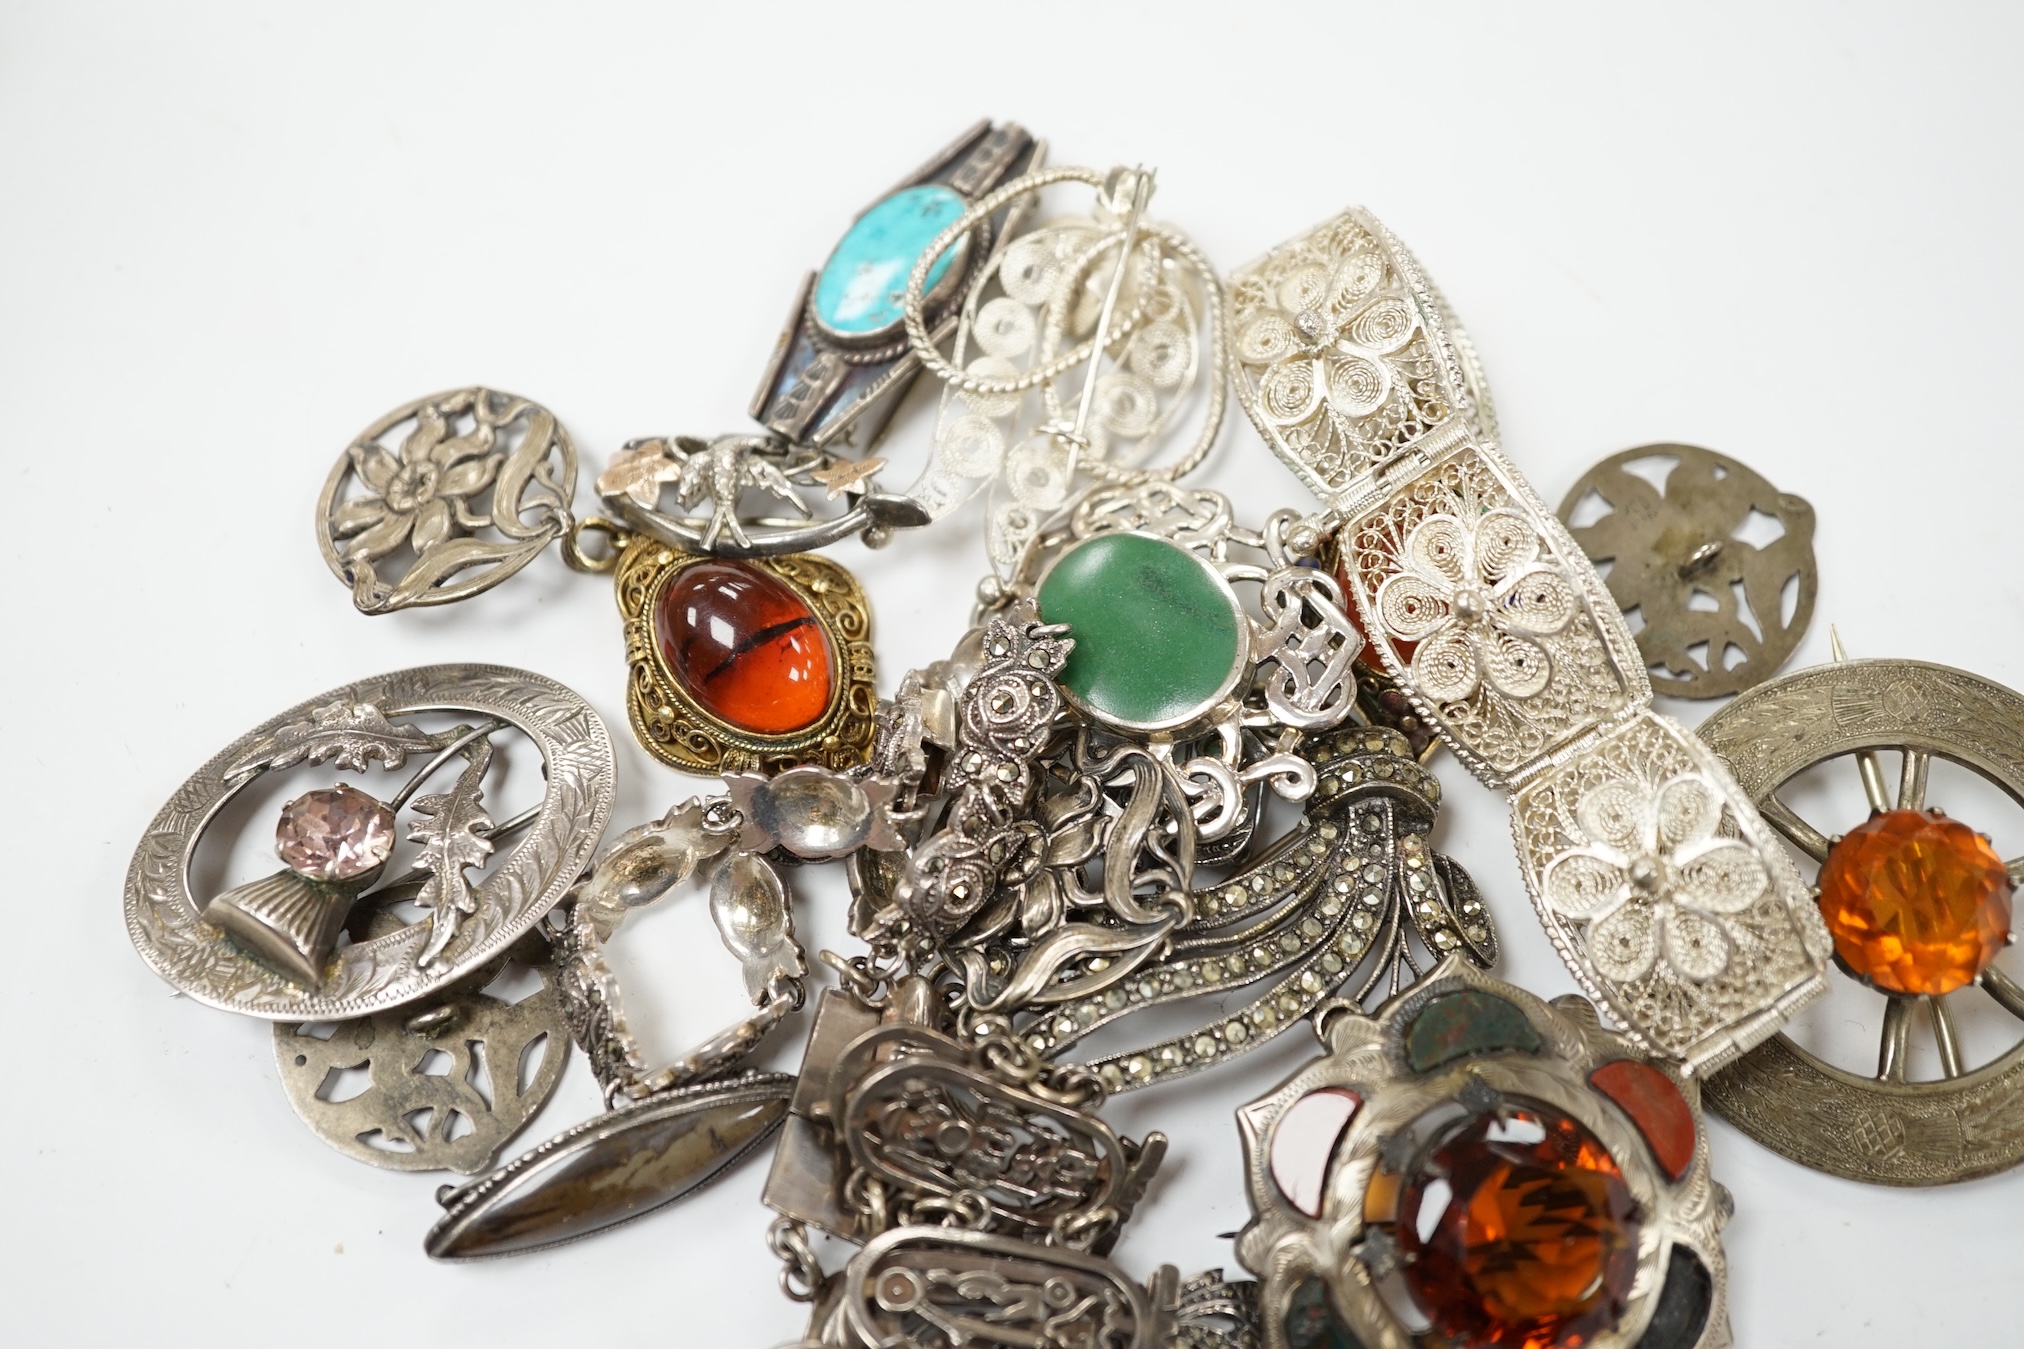 A small quantity of assorted silver and white metal jewellery including filigree bracelet, Scottish hardstone and gem set brooches, etc. Condition - poor to fair